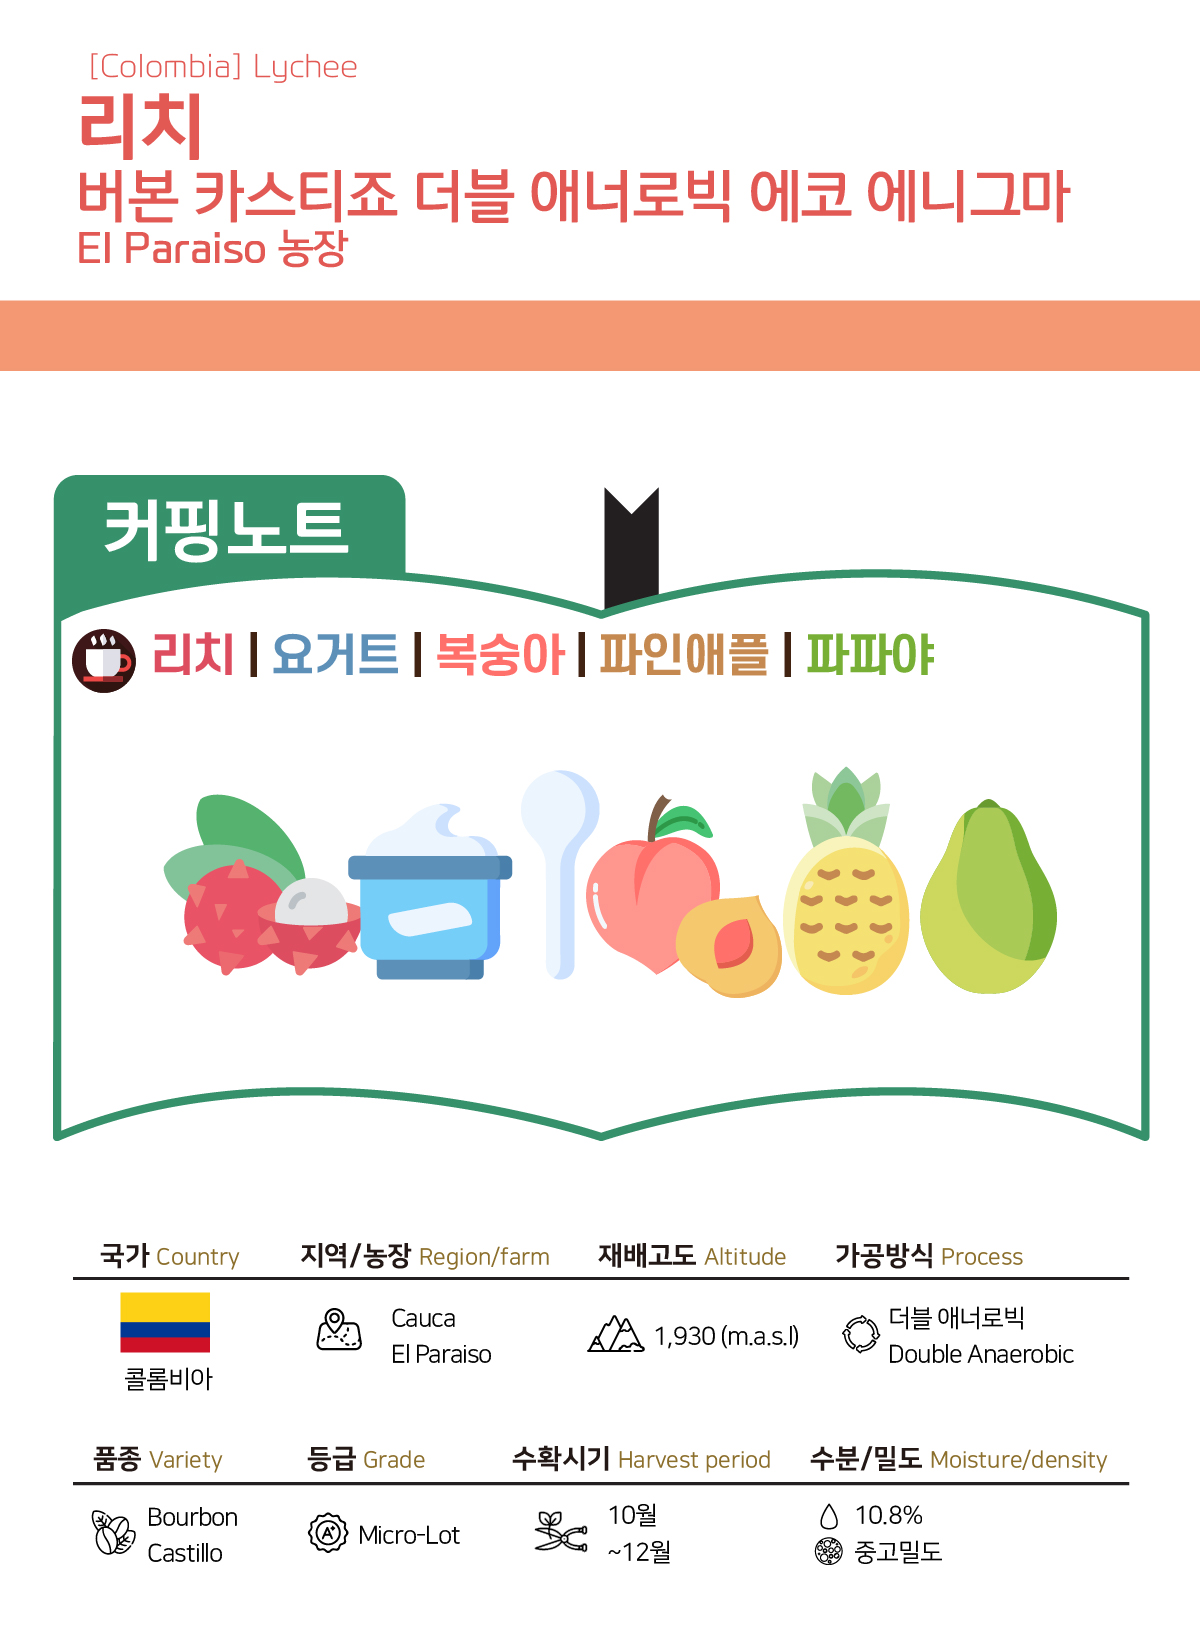 [Colombia] 엘 파라이소 리치